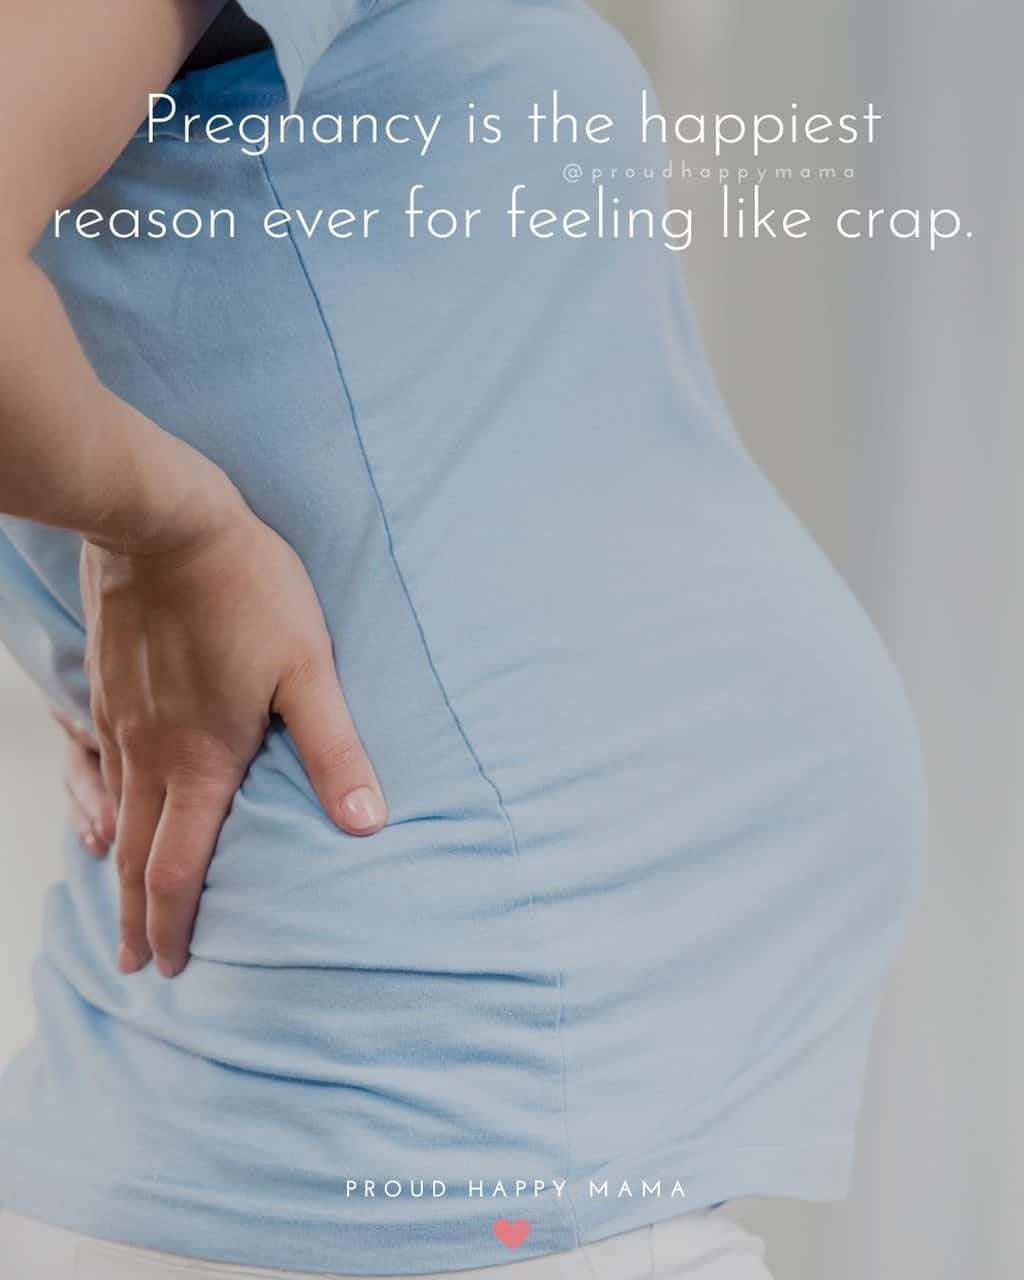 70+ Inspirational Pregnancy Quotes for Expecting Mothers